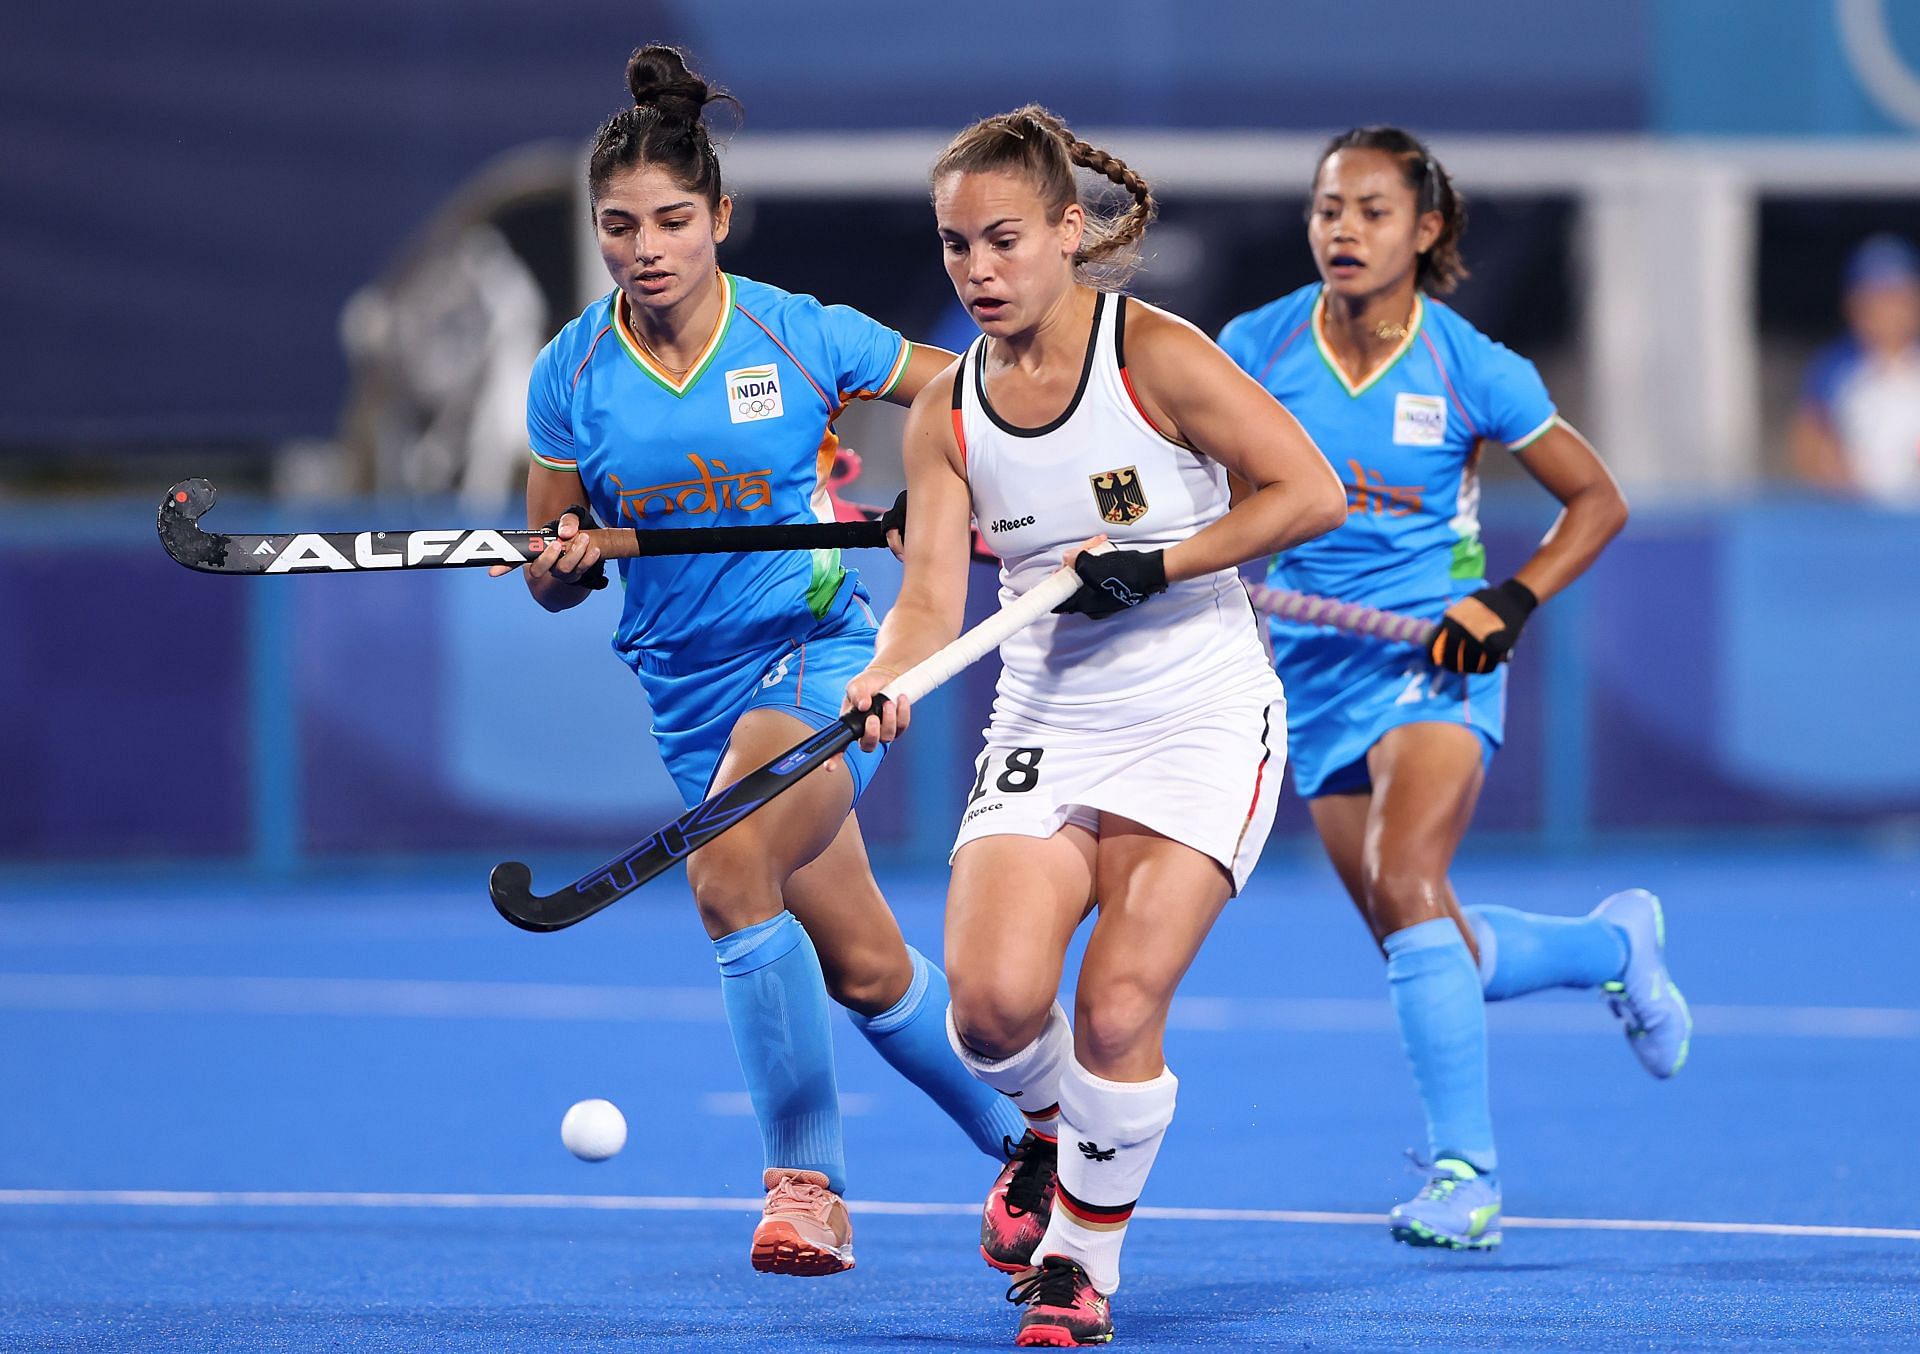 Germany presents a formidable challenge for the Indians in the semifinals at Ranchi